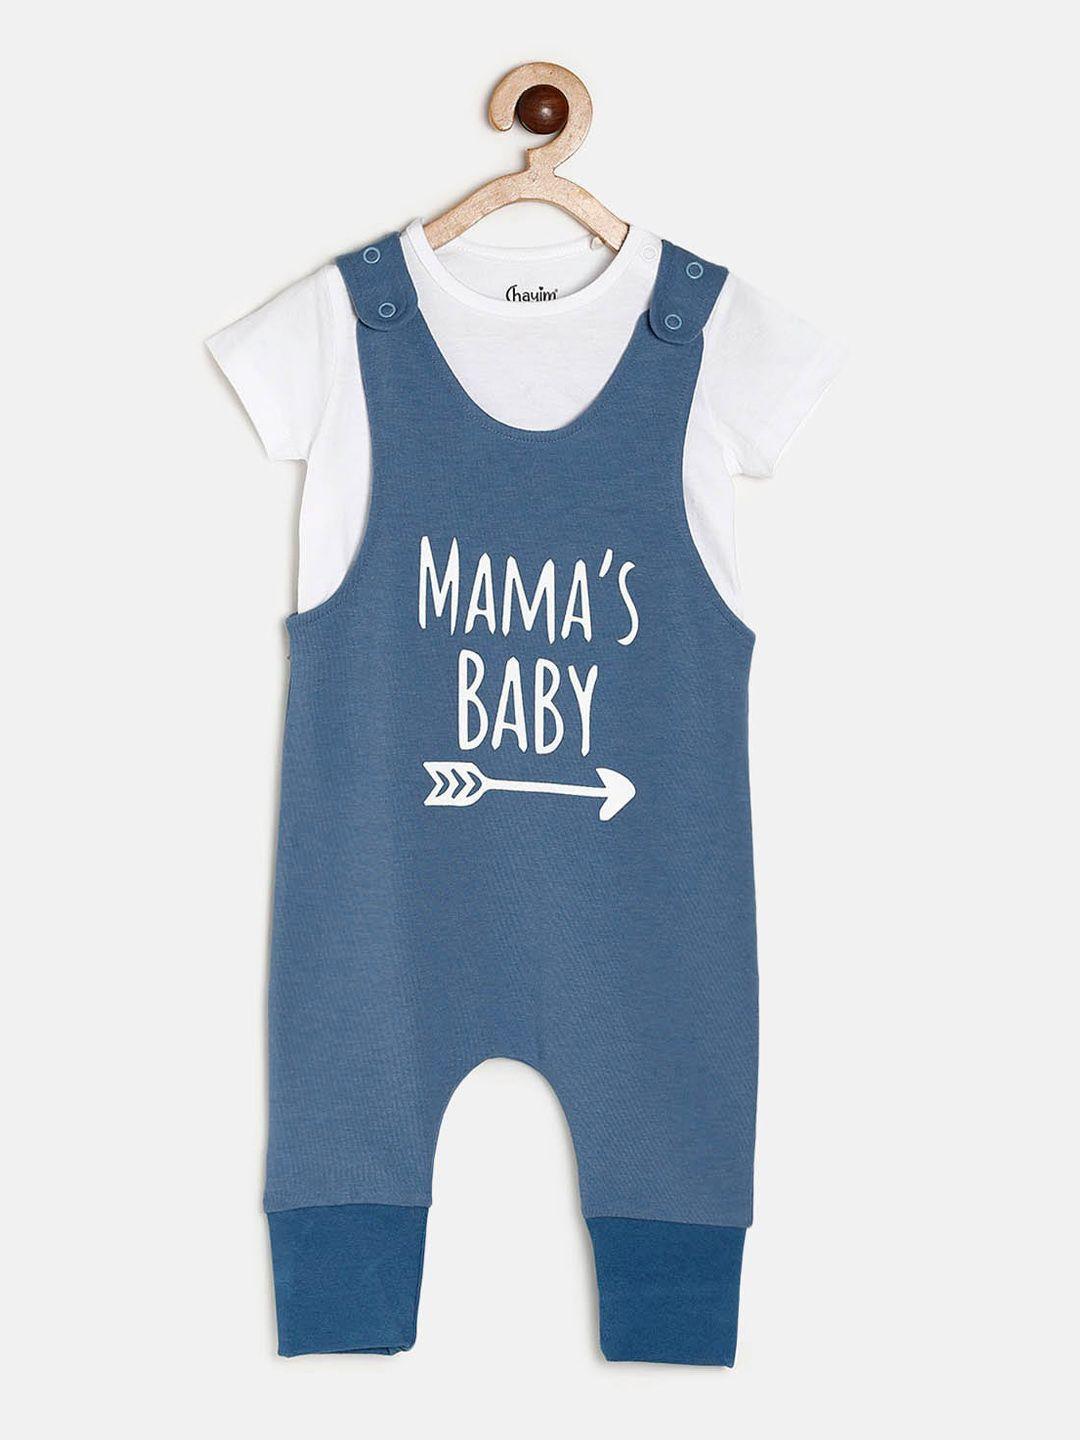 chayim-infants-typography-printed-straight-leg-dungaree-with-t-shirt